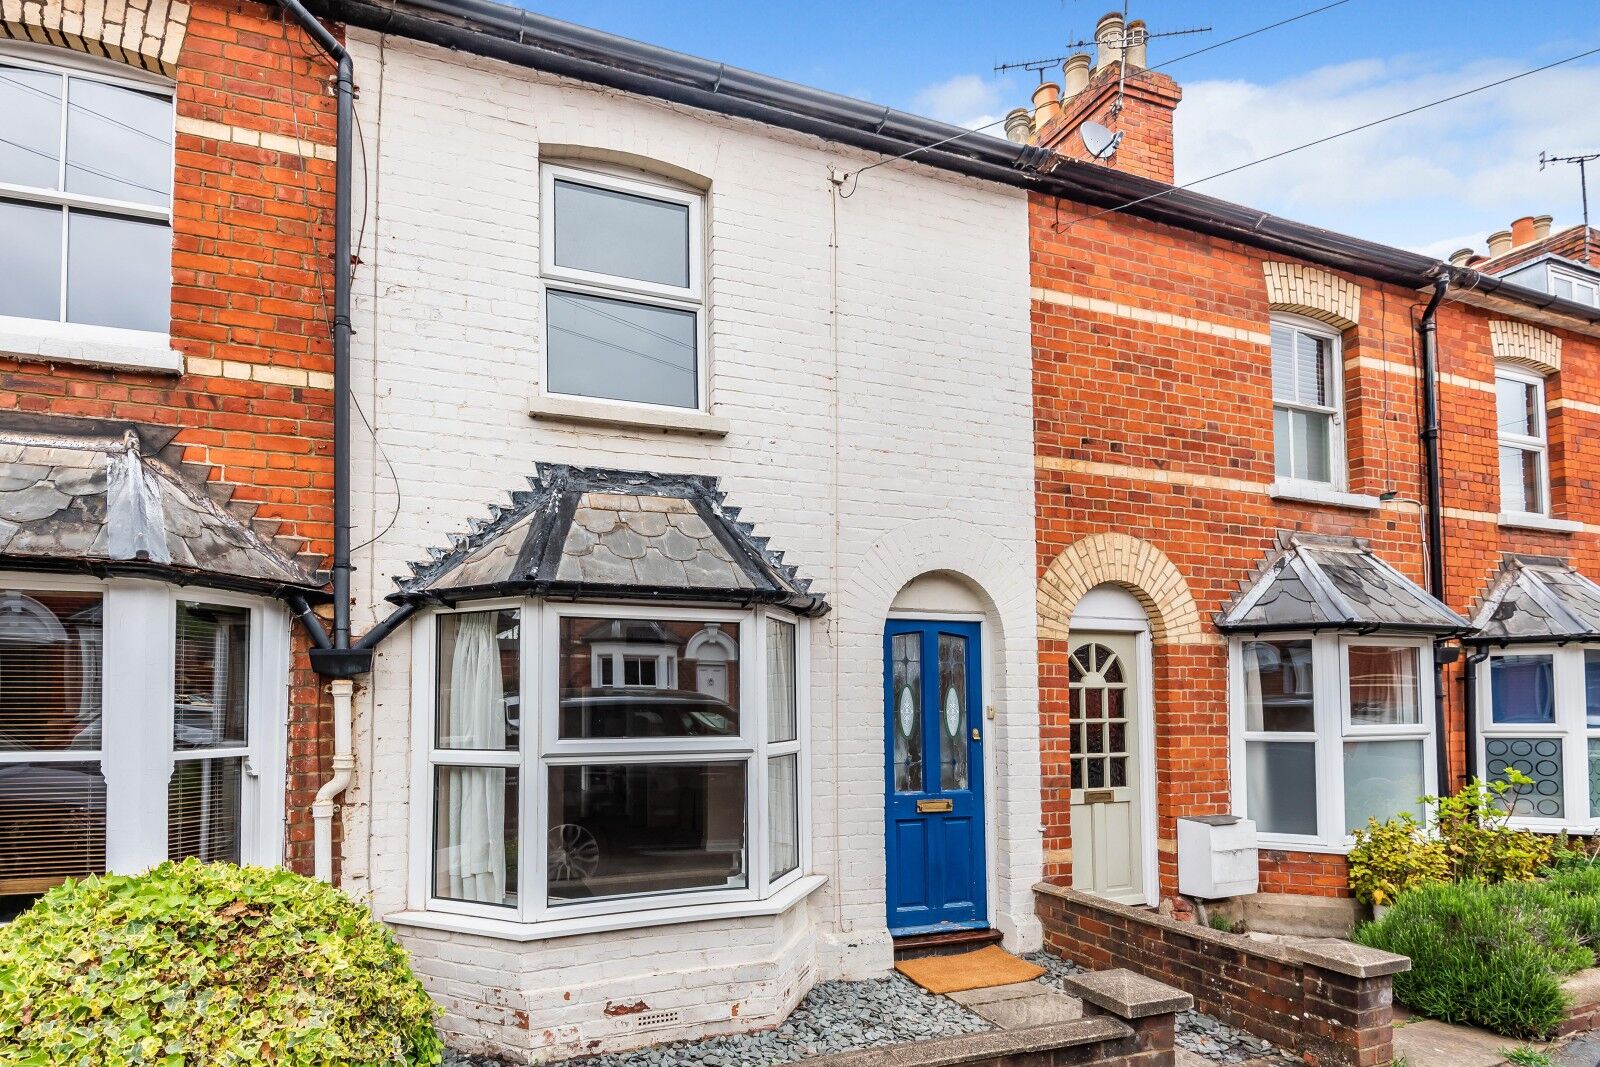 2 bedroom mid terraced house for sale Park Road, Henley-On-Thames, RG9, main image